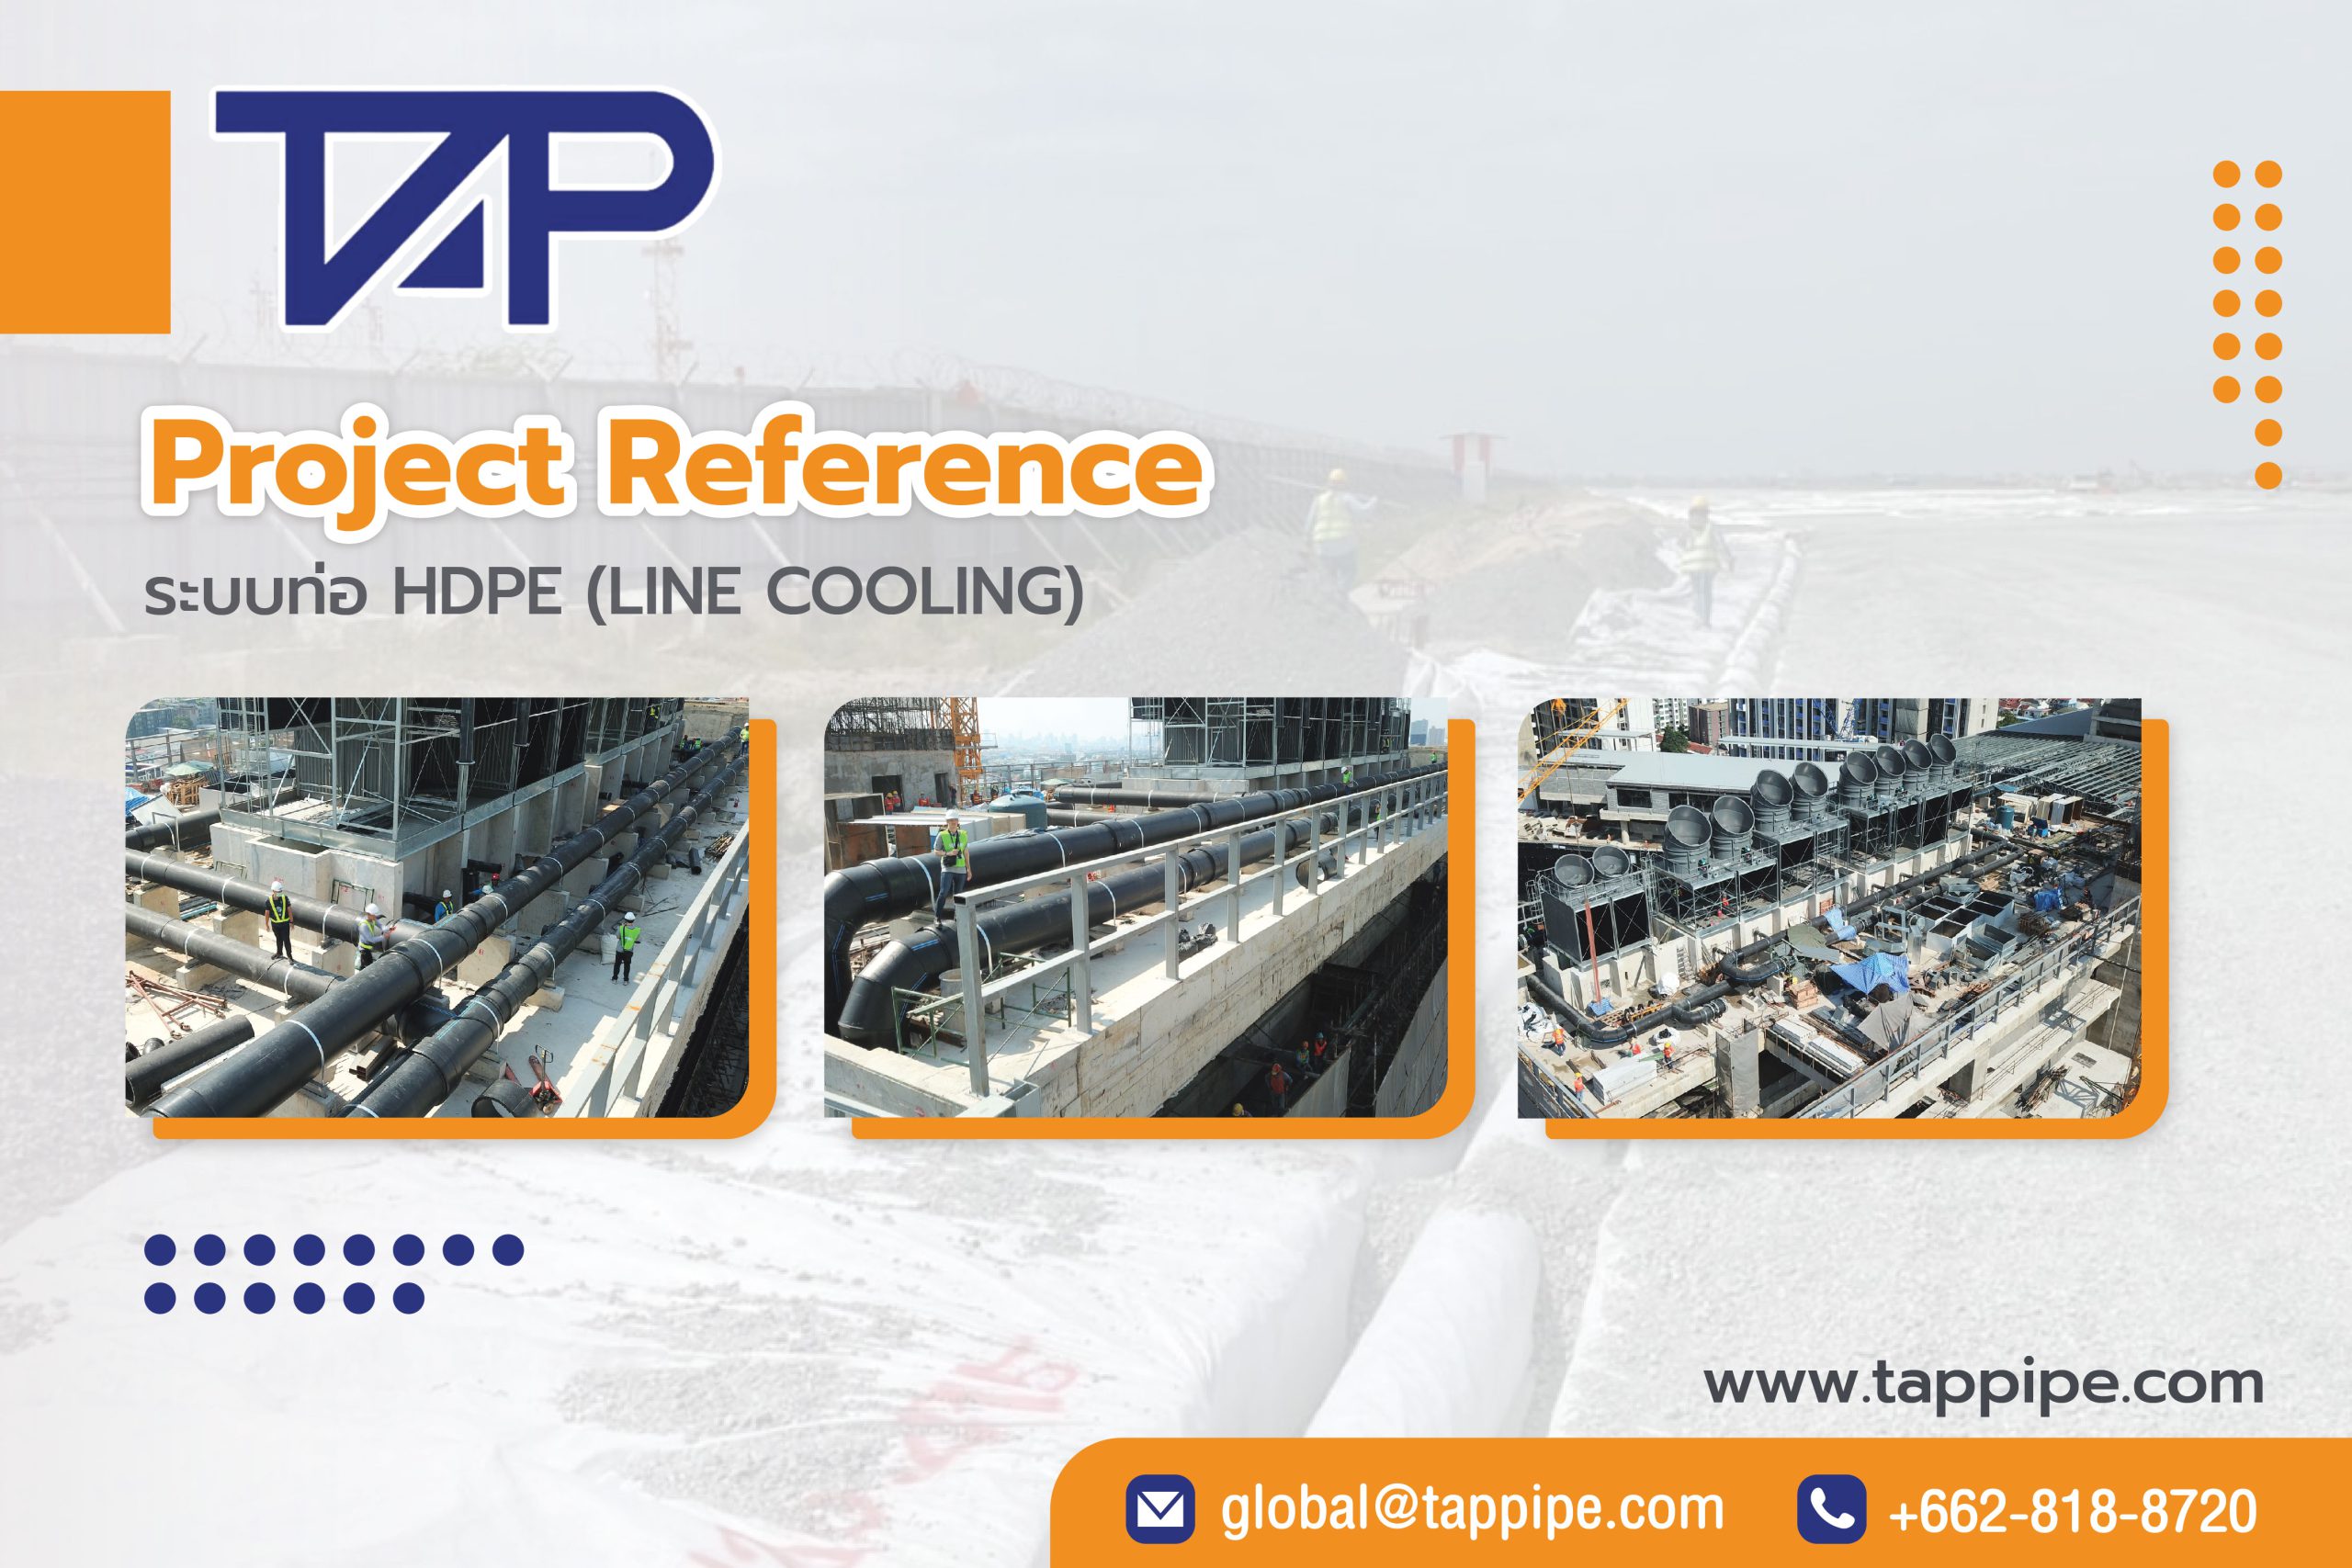 Cover picture of HDPE pipe system (LINE COOLING)